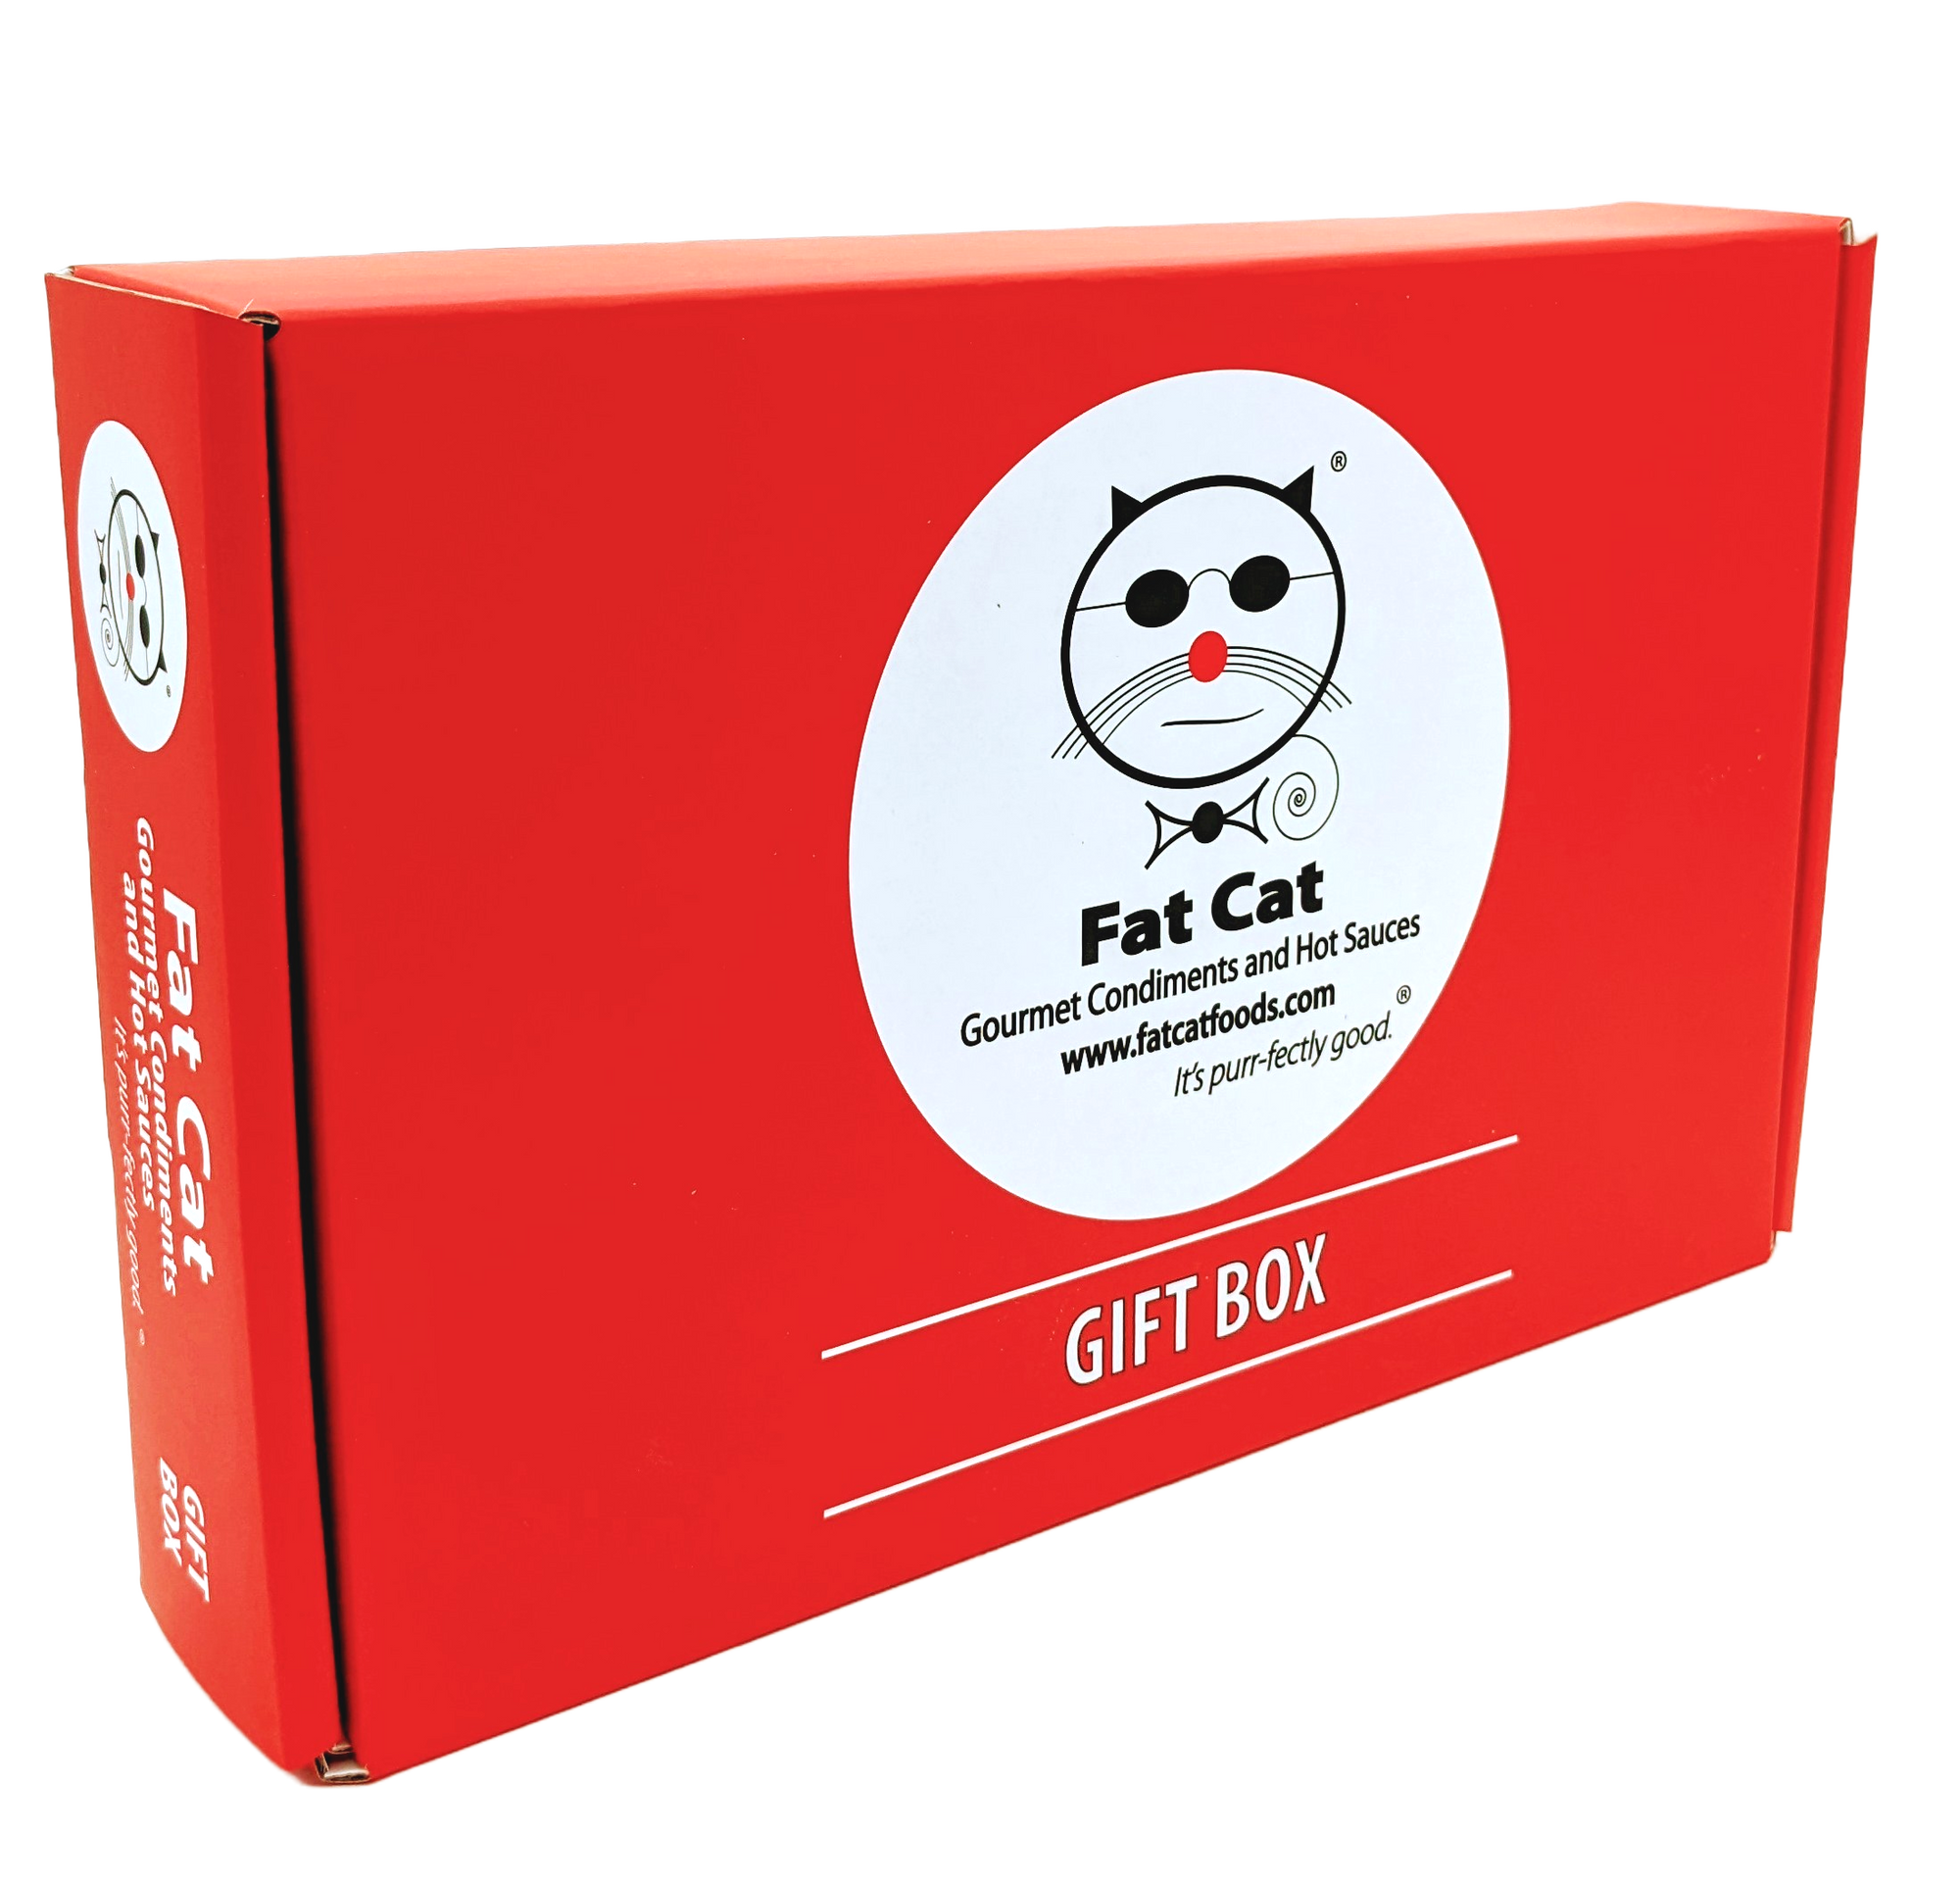 Add Gift Box Packaging to Your Order (Add-On) - Fat Cat Gourmet Hot Sauce & Specialty Condiments